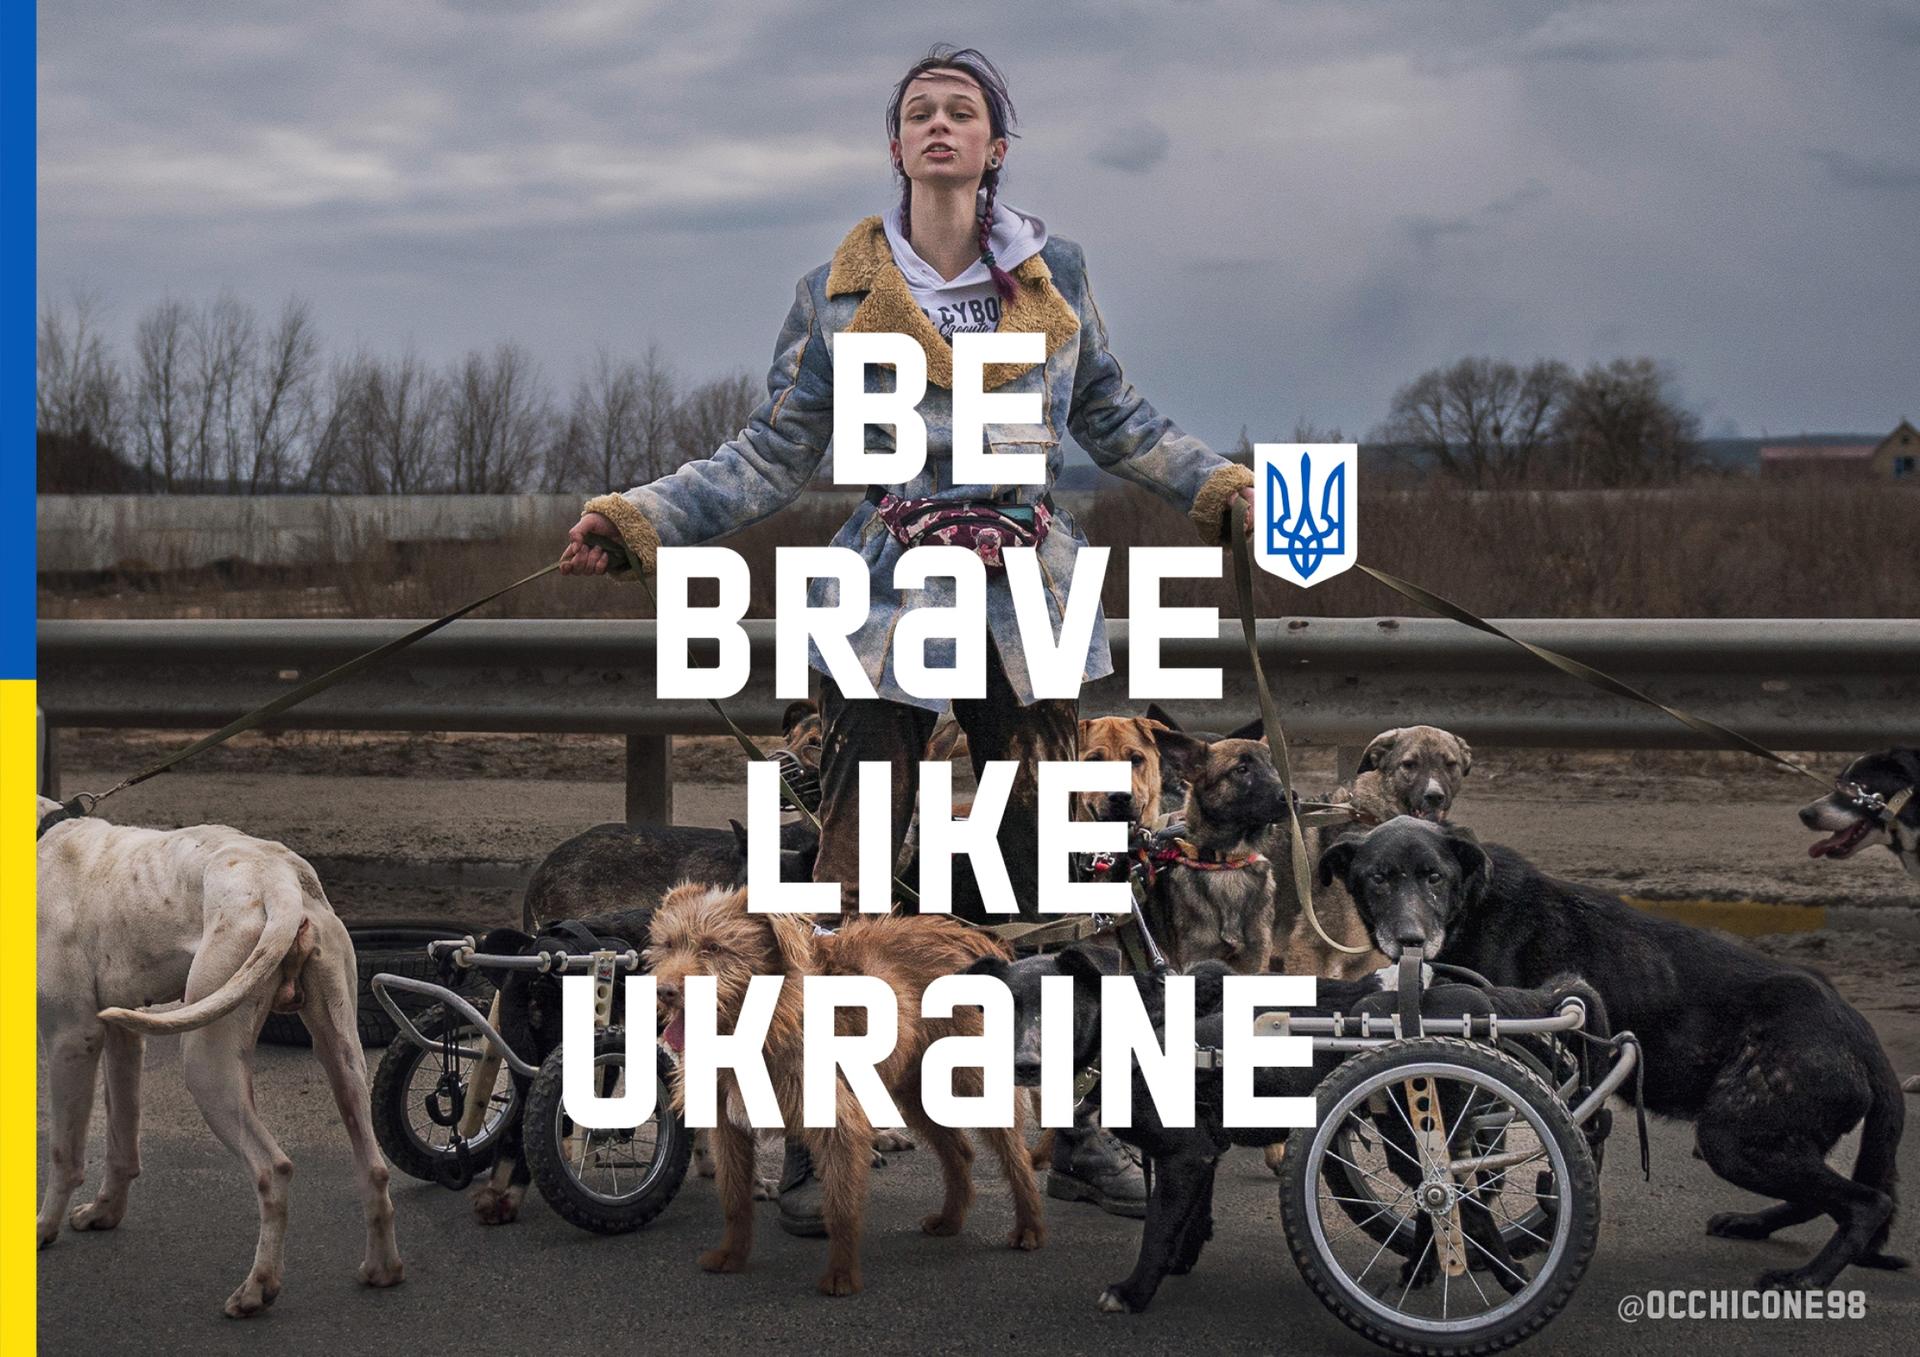 A woman in white is shown holding the leashes of several dogs, with the words 'Be brave like Ukraine' in big text over her